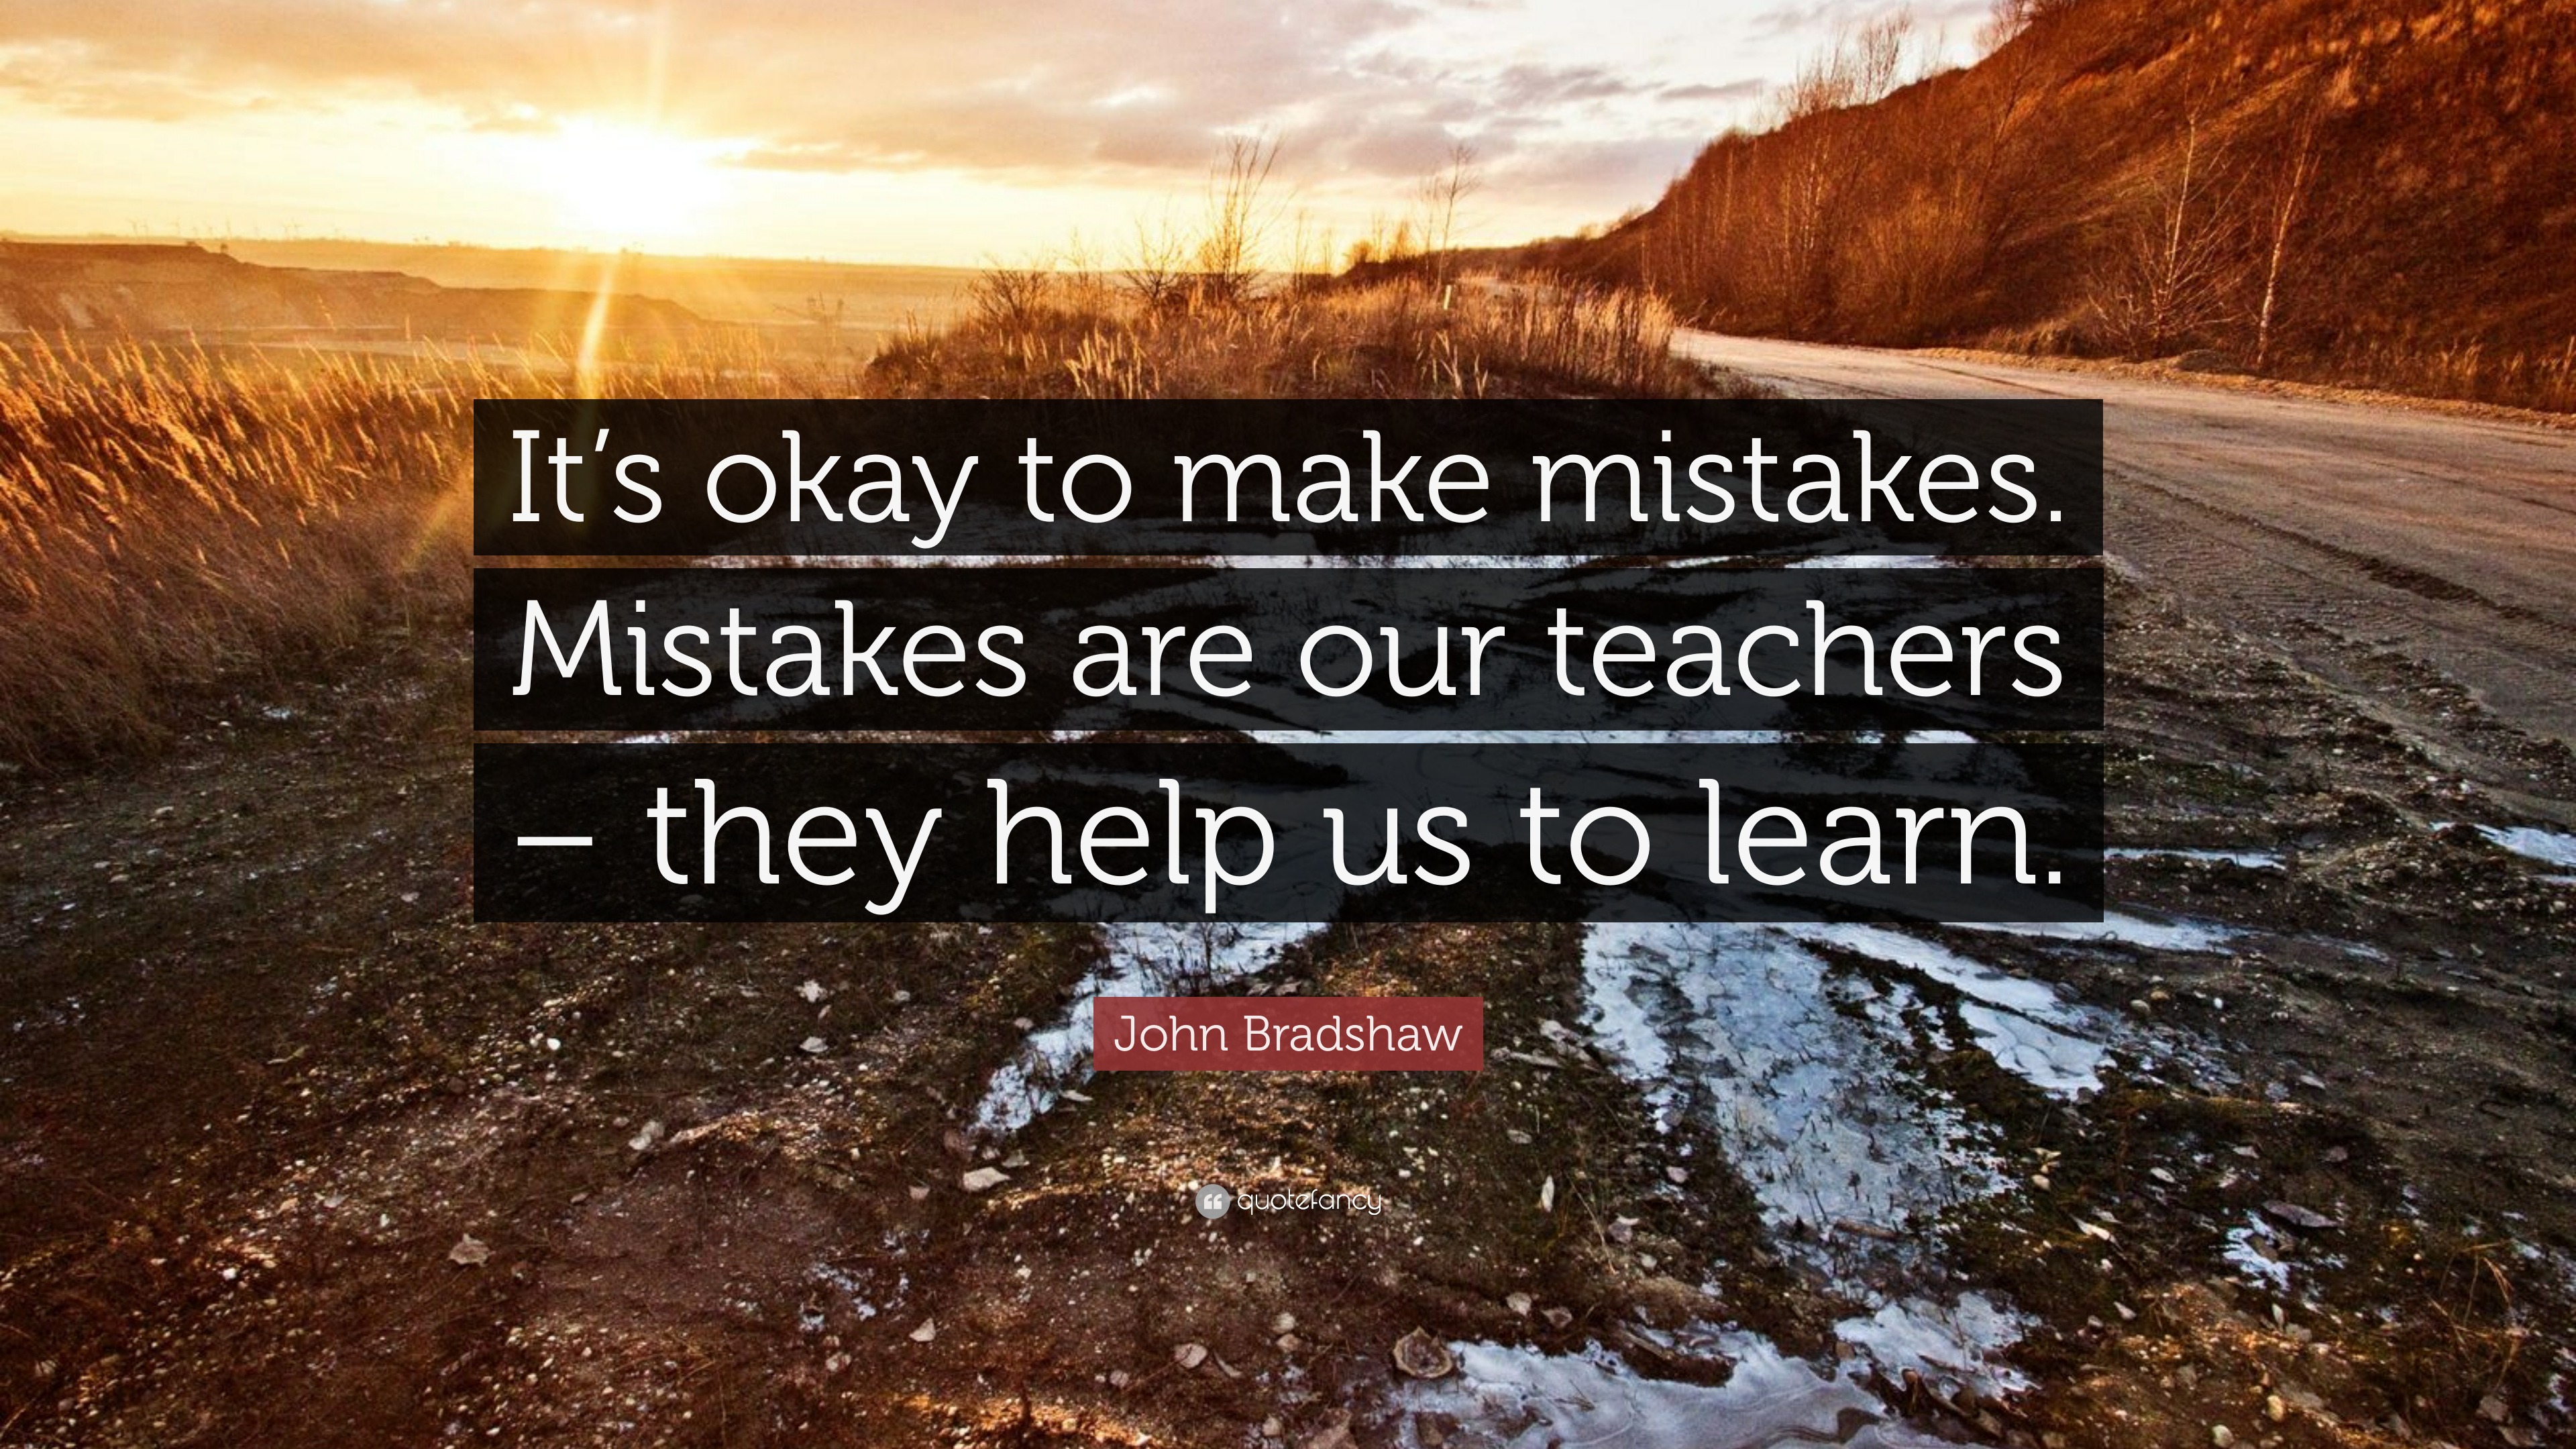 John Bradshaw Quote: “It’s okay to make mistakes. Mistakes are our